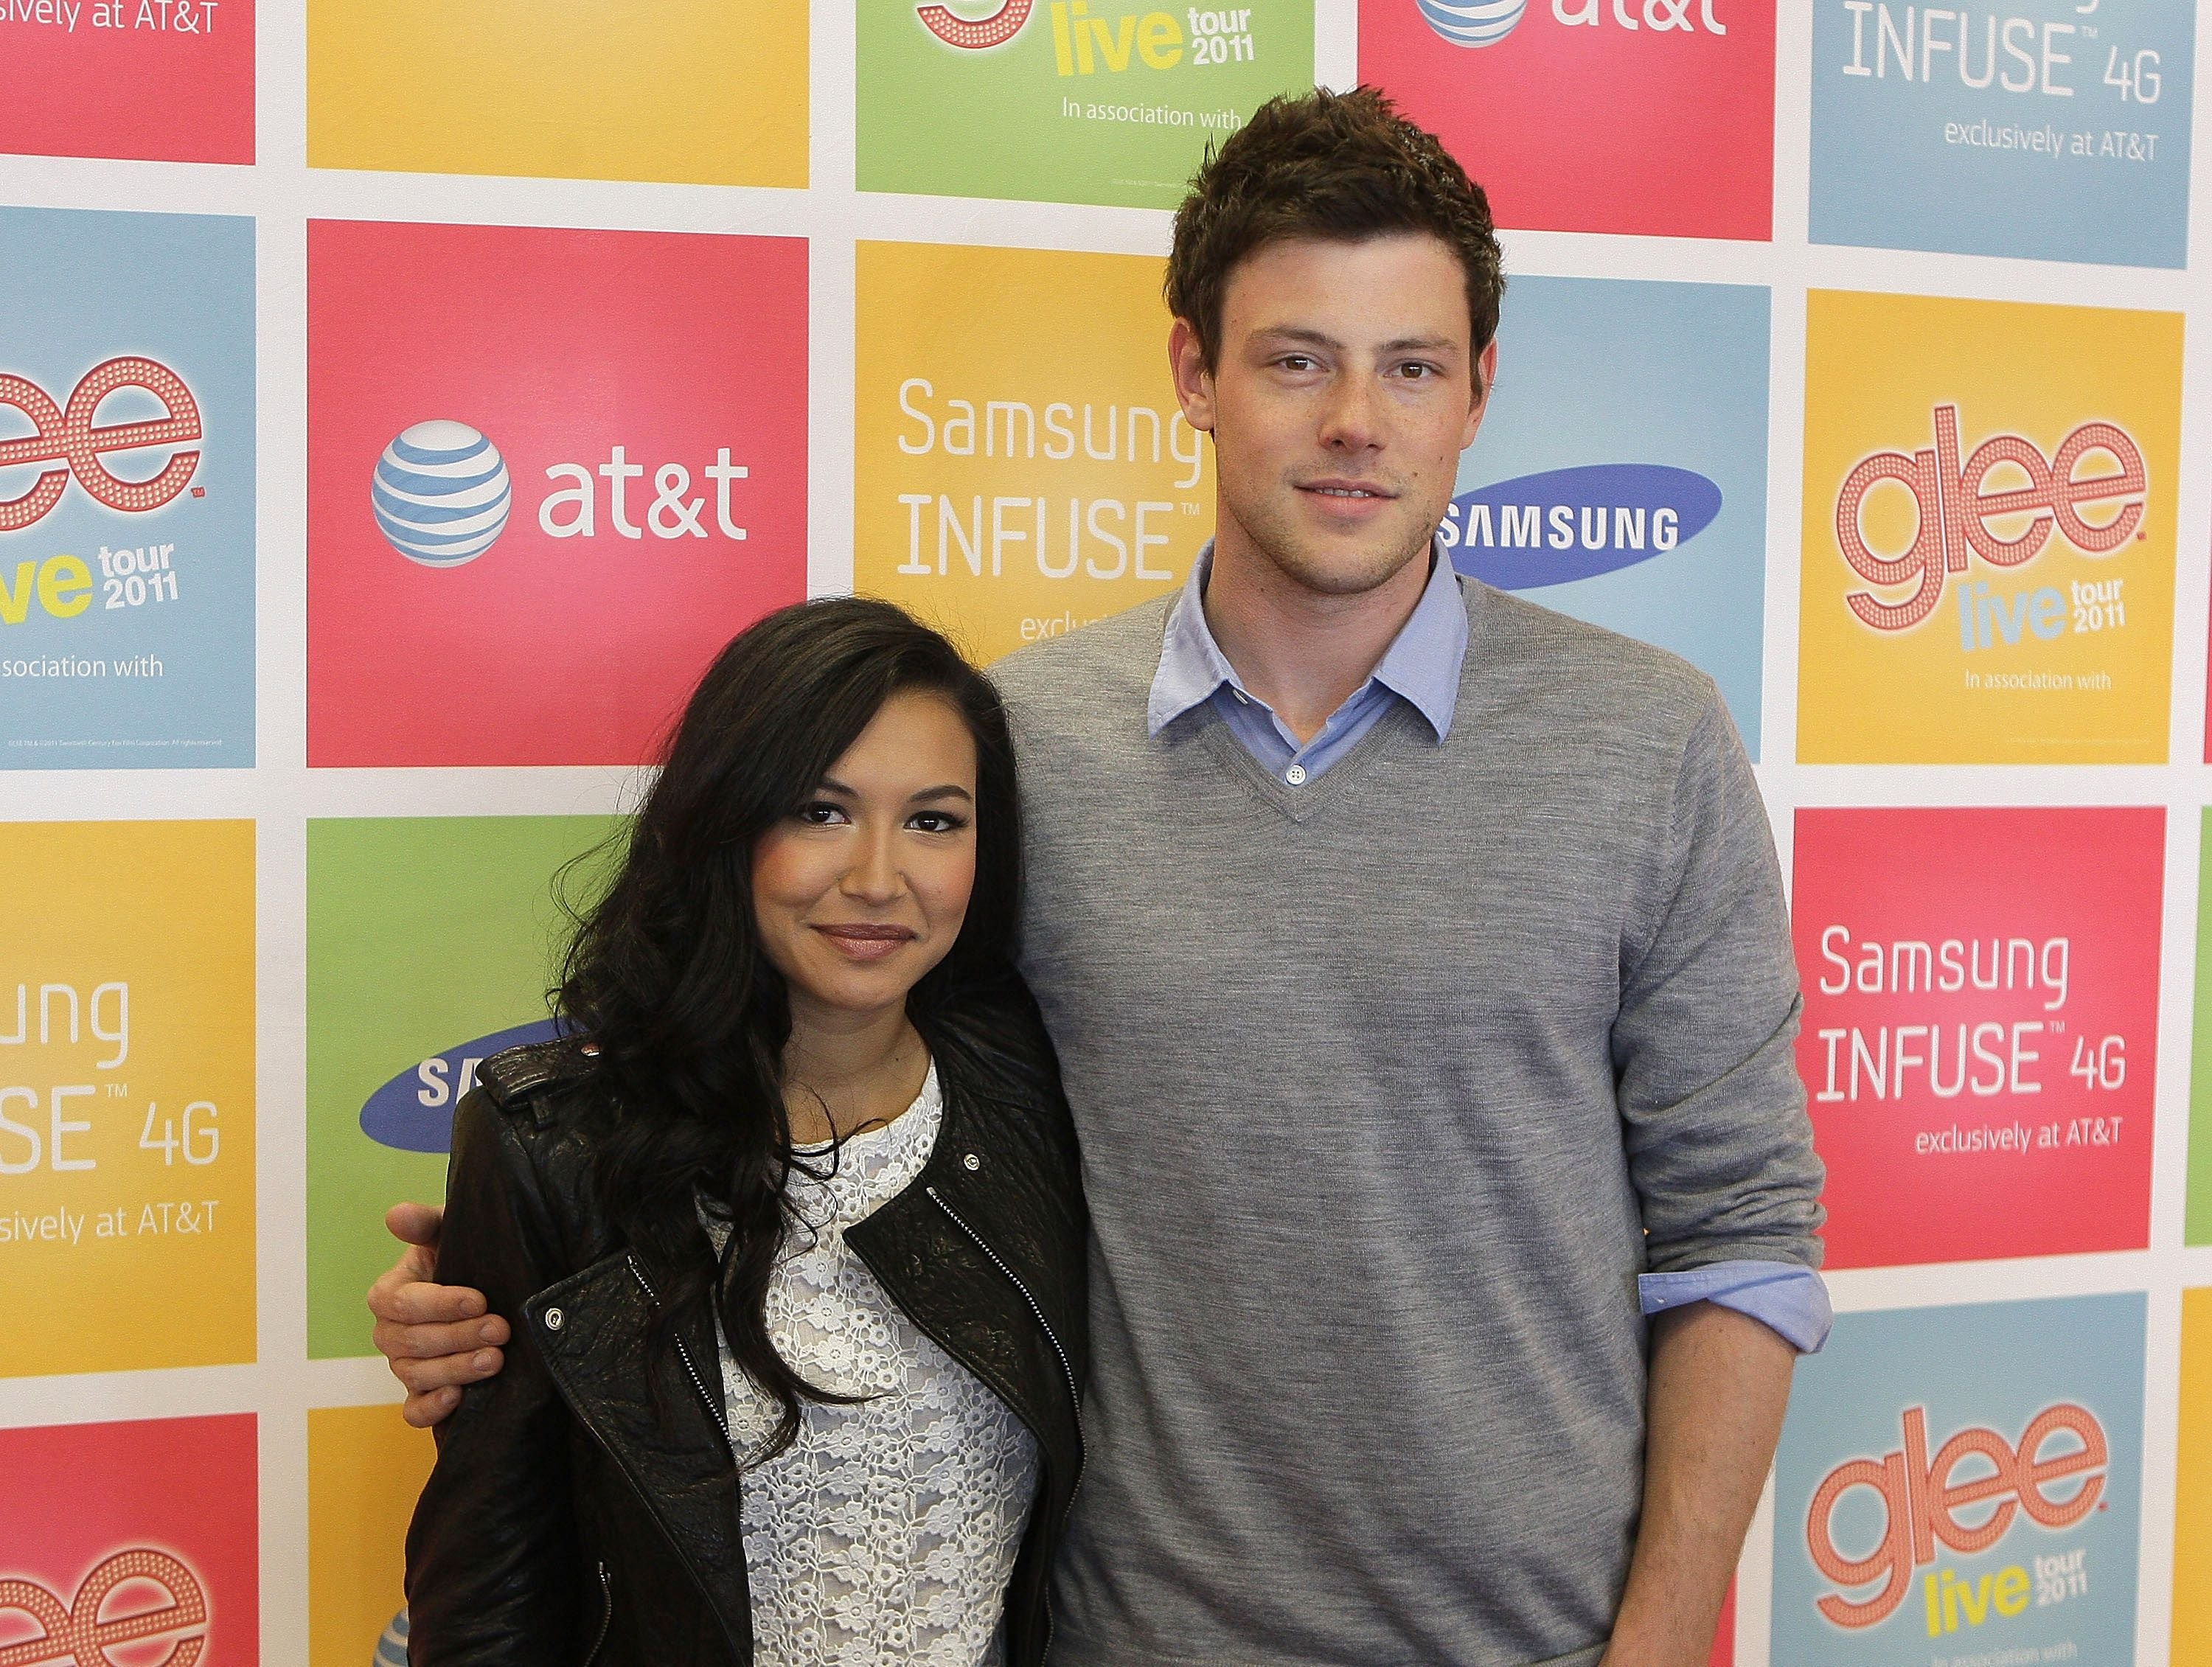 Naya Rivera and Cory Monteith during the  "GLEE Live Tour" Fan Event in May 2011 in San Jose, California | Source: Getty Images